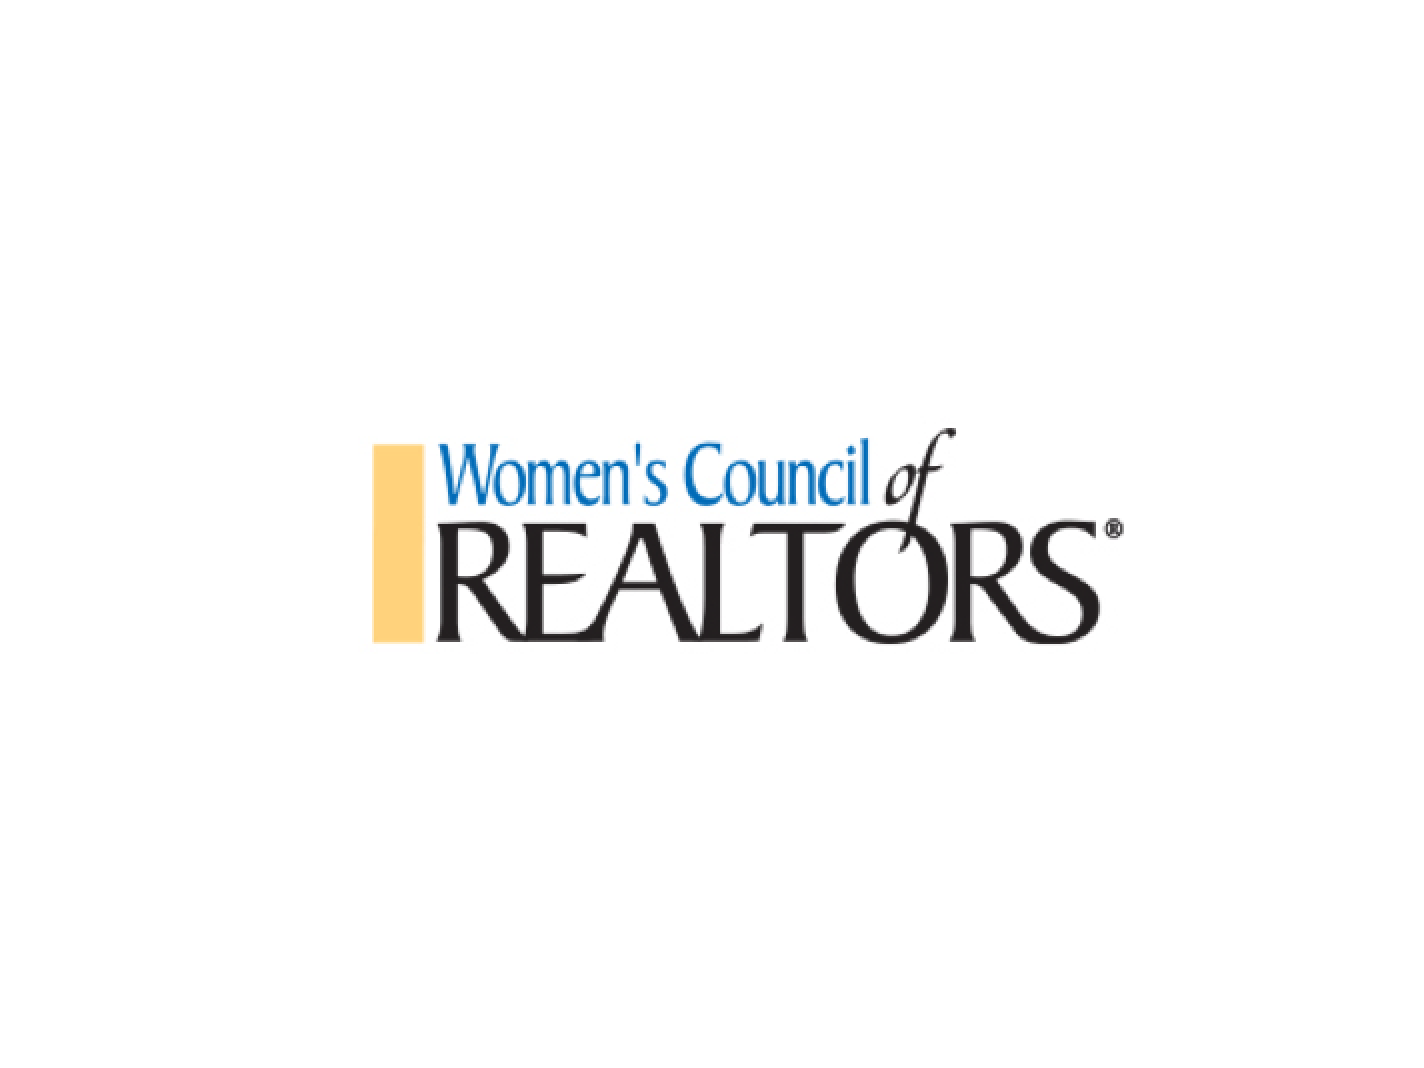 national-womens-council-realtors-instagram-where-a-picture-worth-a-thousand-words